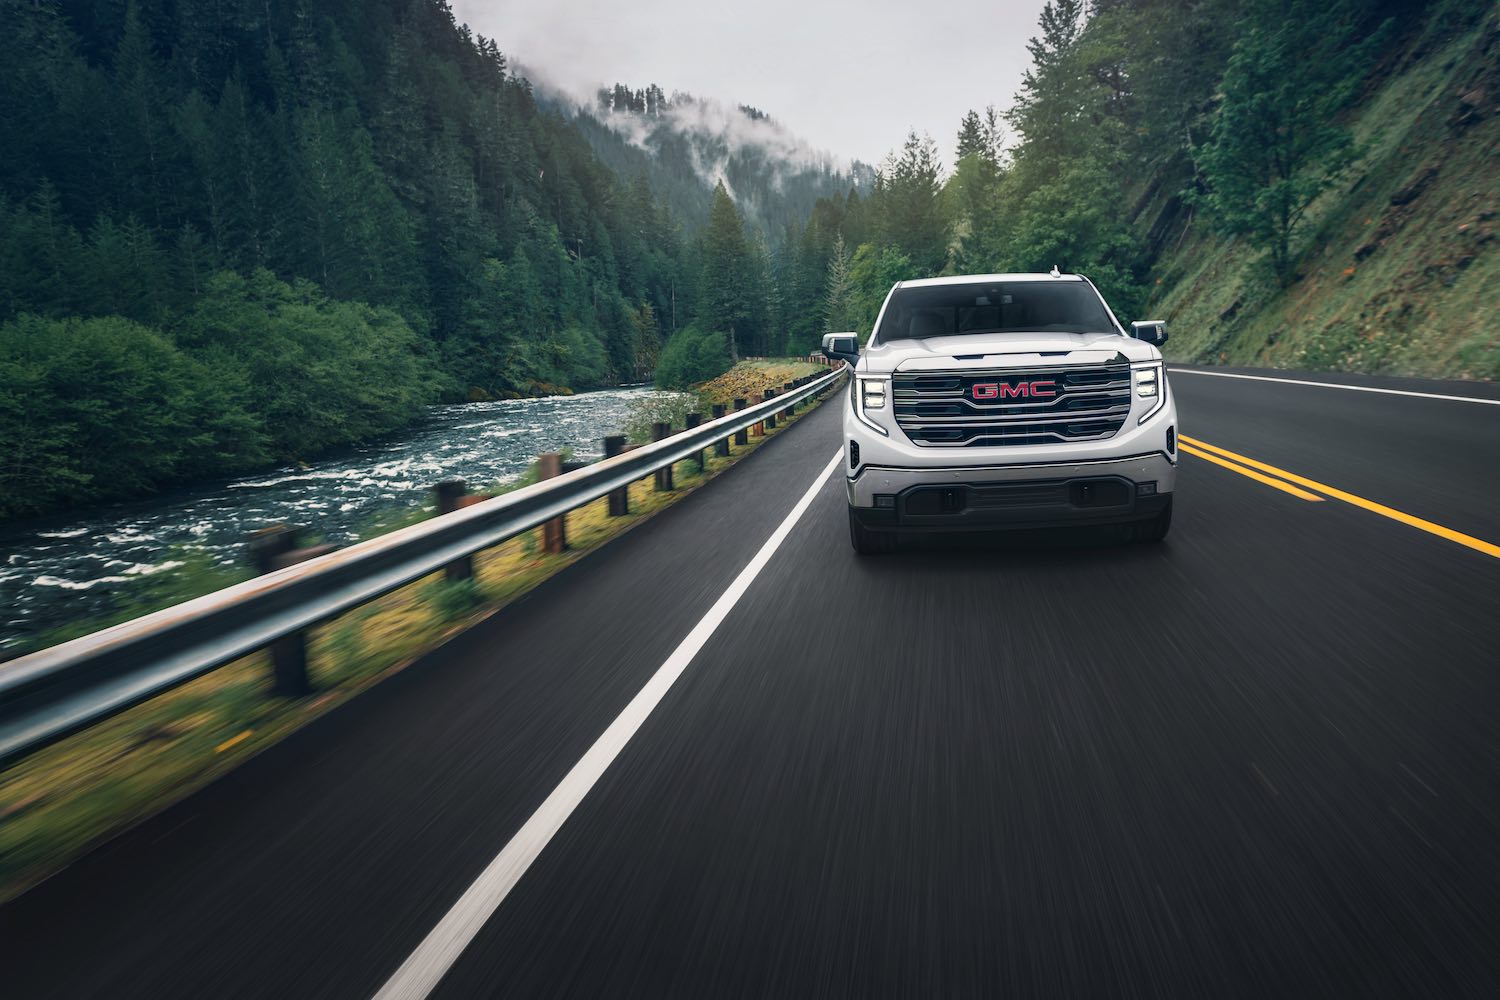 A white GMC Sierra 1500 pickup truck drives along a paved road, trees lining both sides.